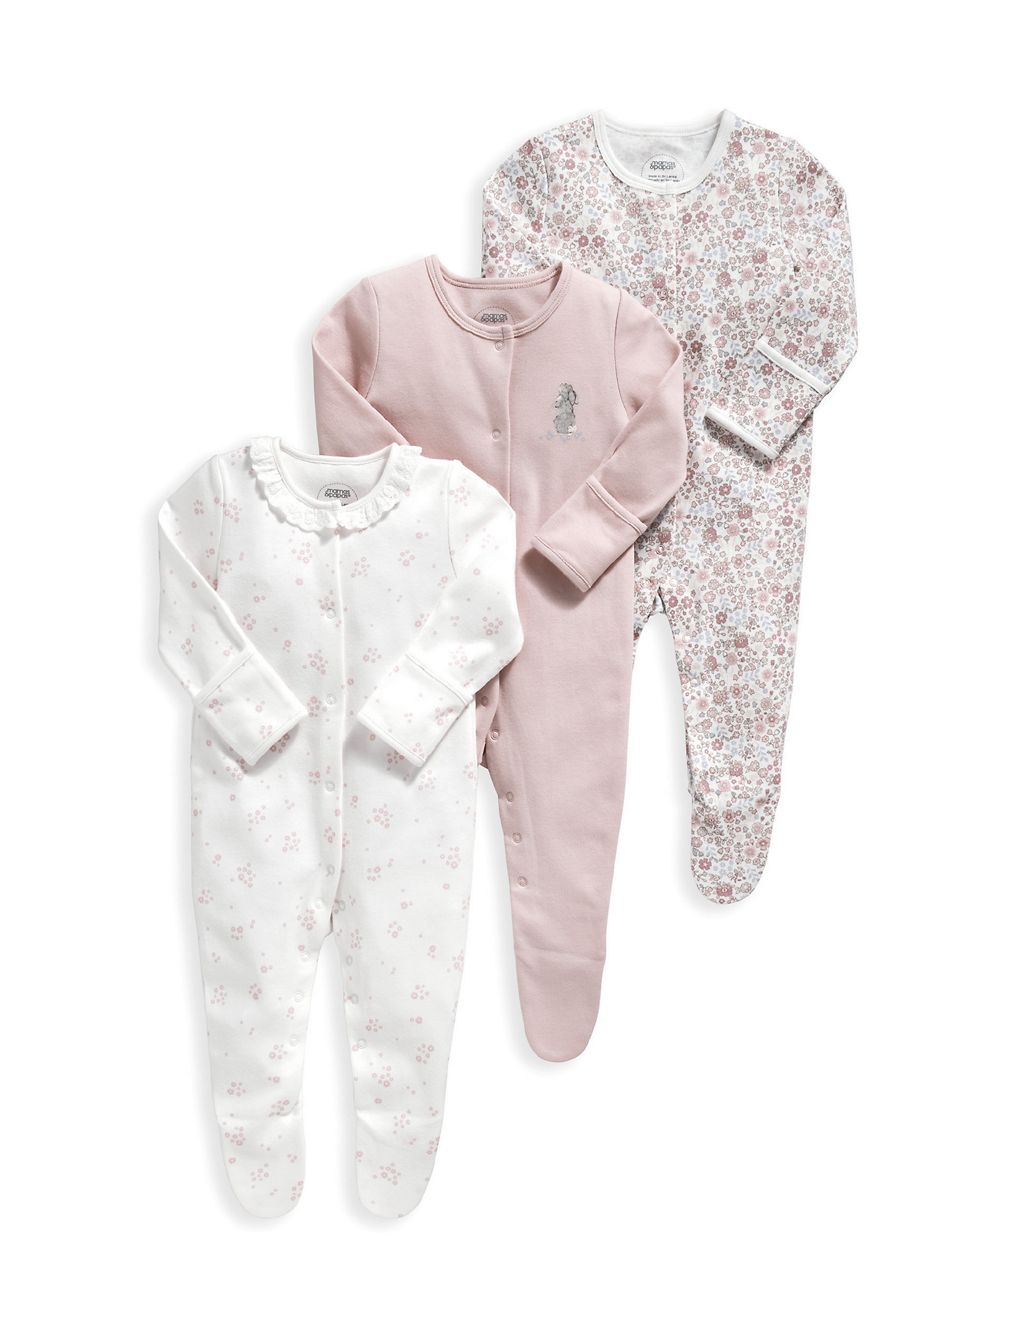 Oh Darling Girl Sleepsuits 3 Pack (6½lbs-18 Mths) 1 of 3